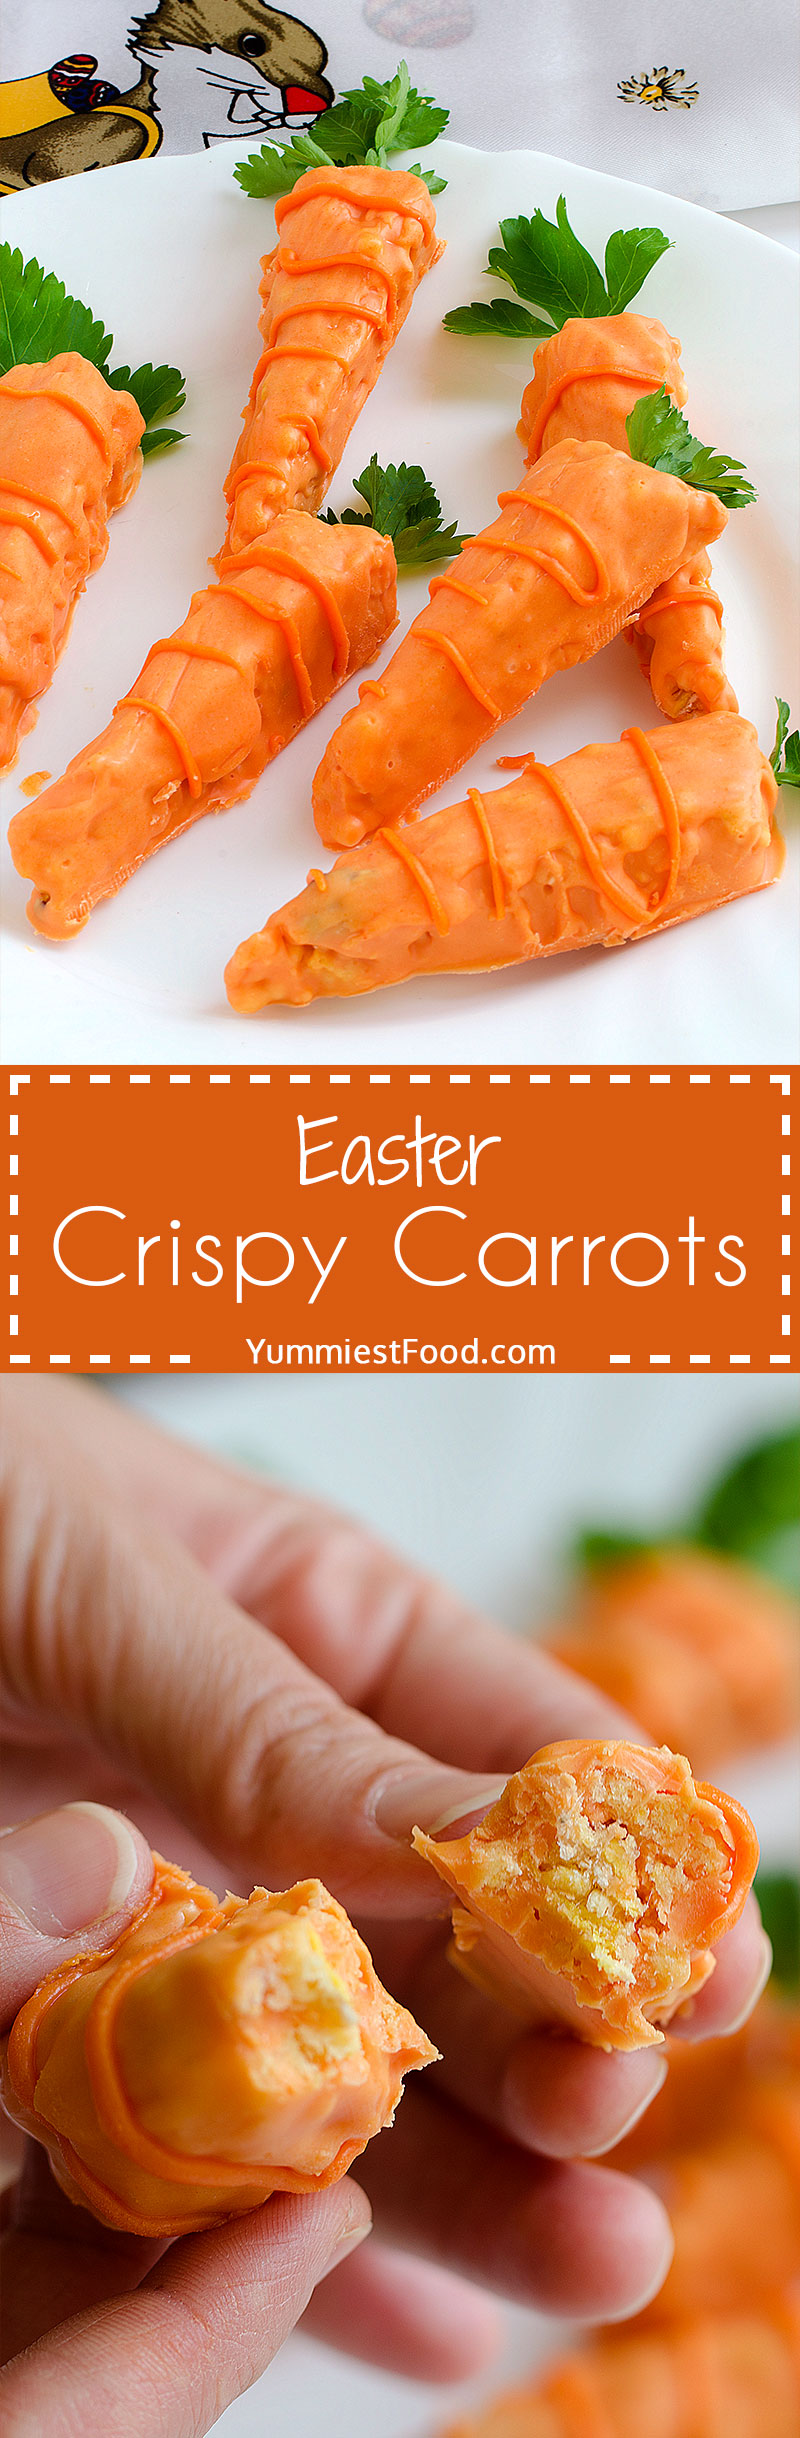 Easter Crispy Carrots - These Easter crispy carrots are perfect! You must use your imagination to make them and your children will enjoy these healthy dessert